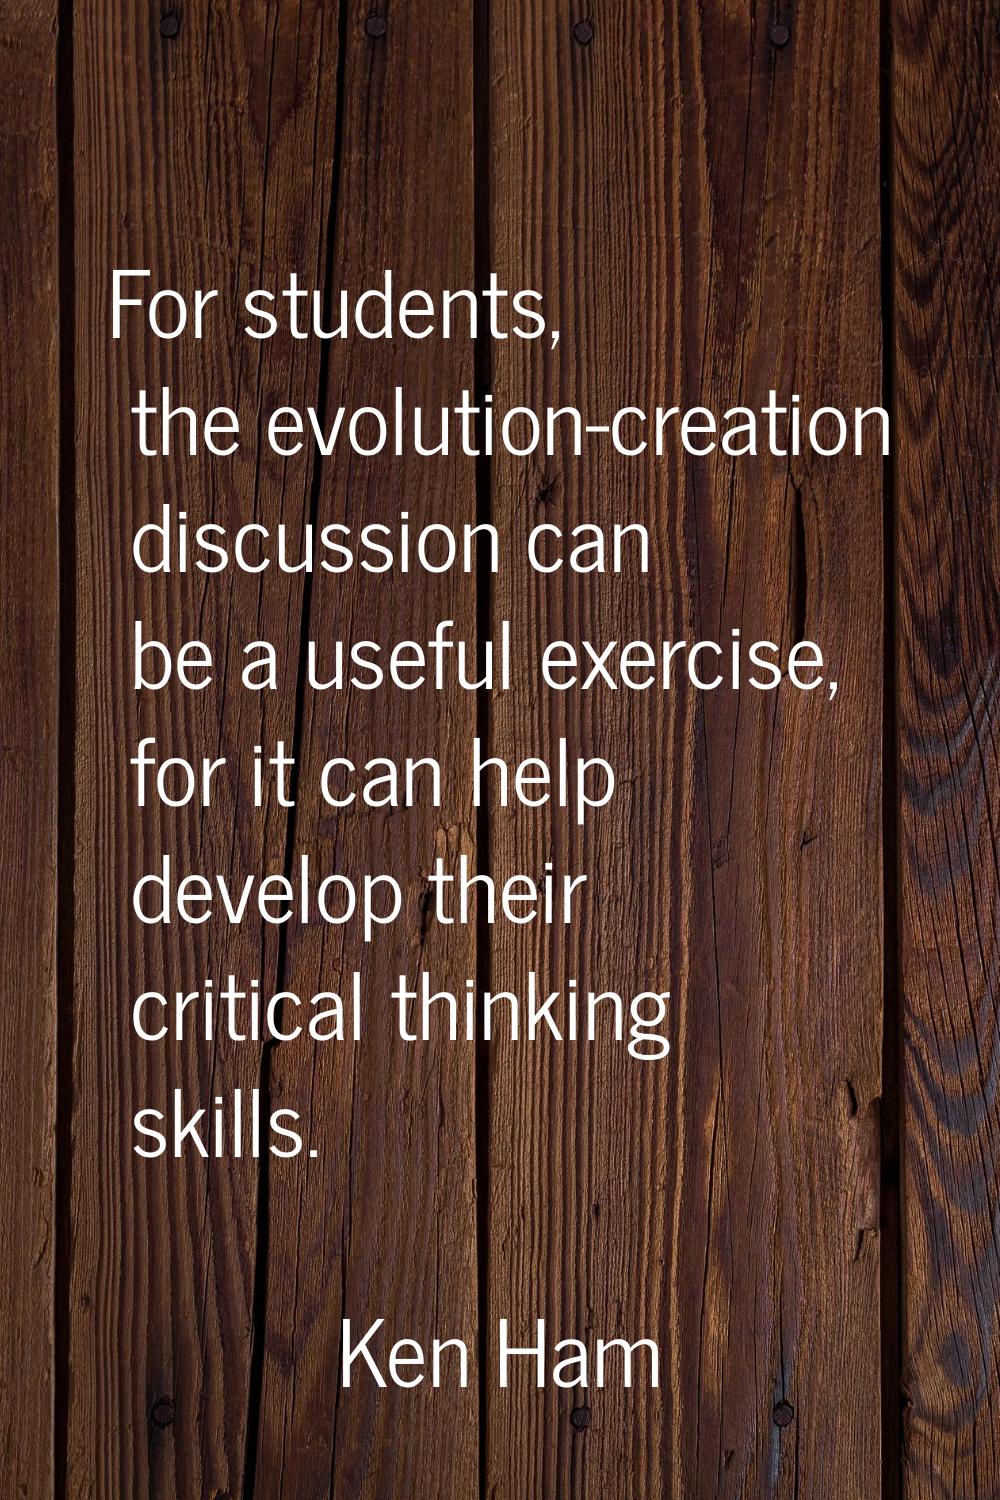 For students, the evolution-creation discussion can be a useful exercise, for it can help develop t